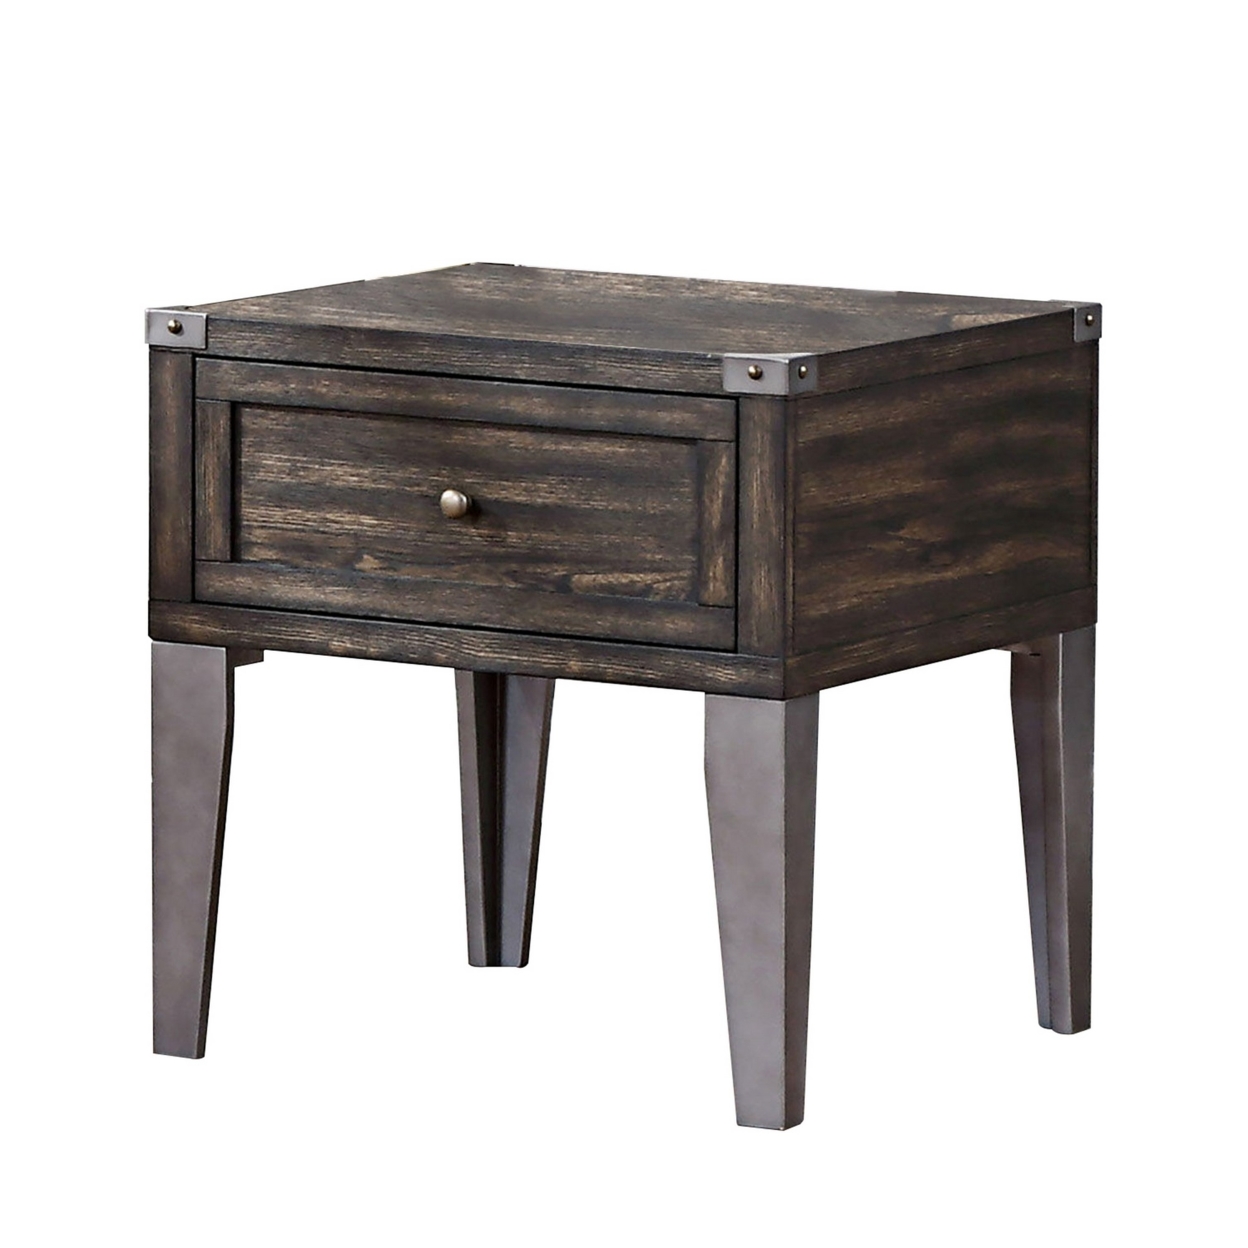 1 Drawer Wooden End Table With Metal Angled Legs, Brown- Saltoro Sherpi